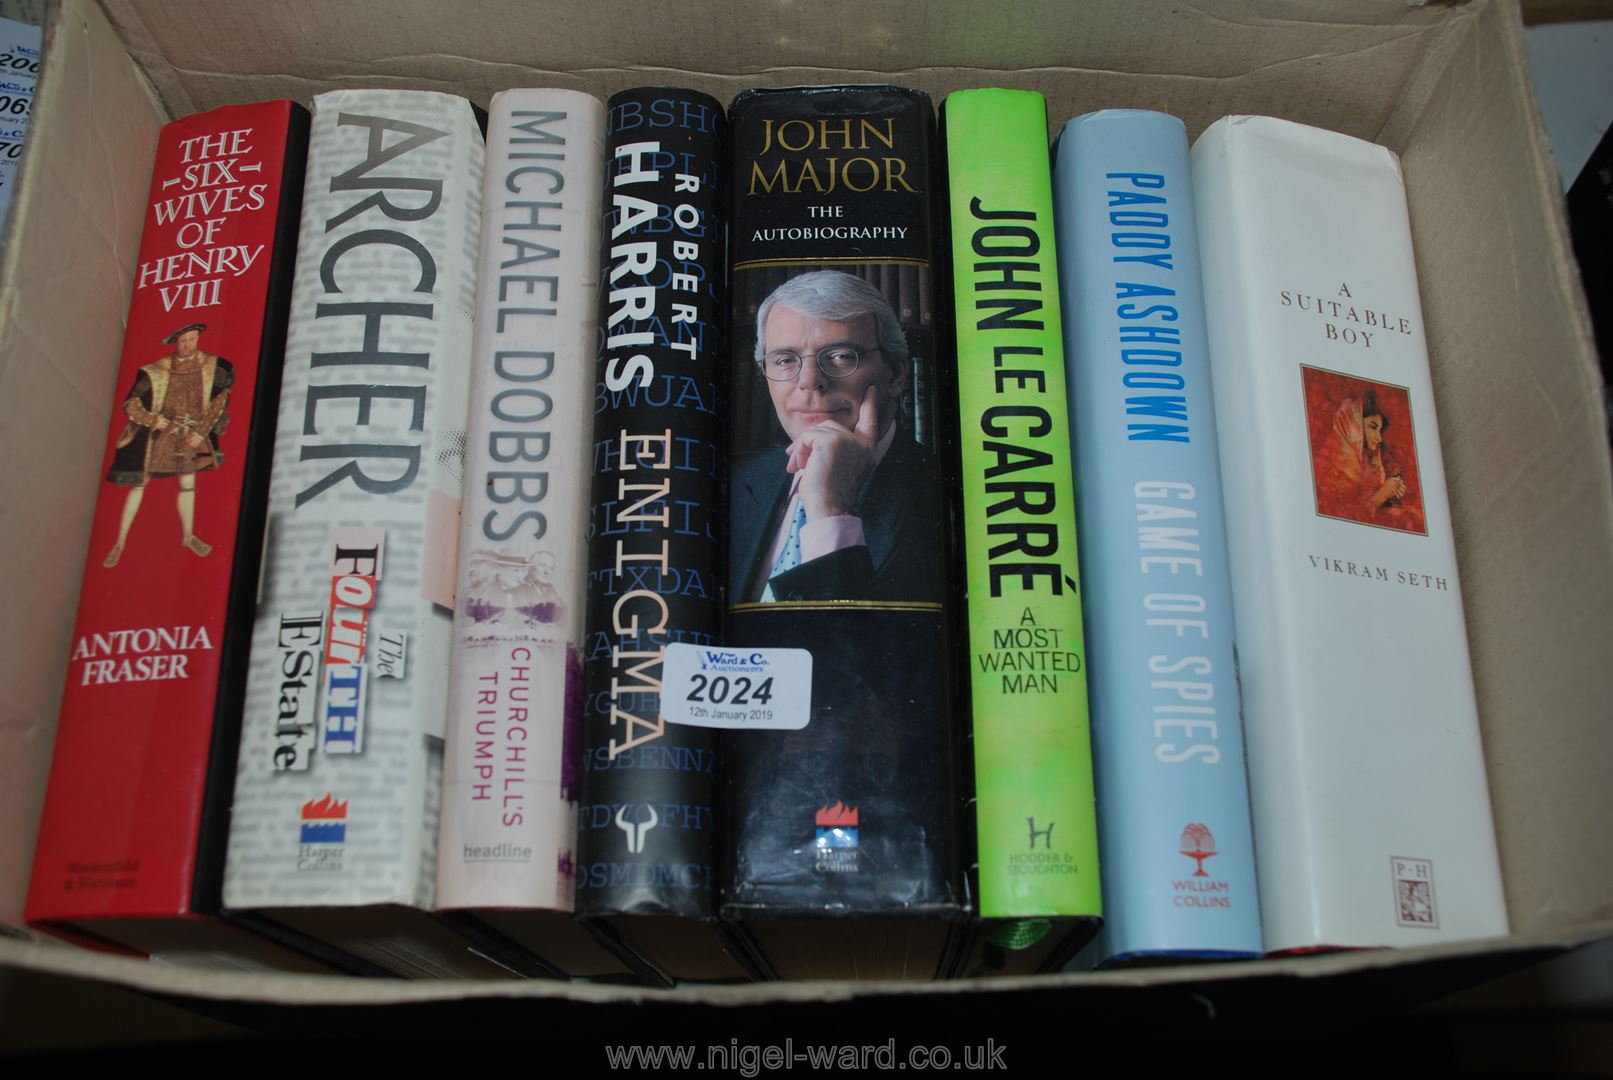 8 books to include; John Le Carre, Robert Harris enigma, Paddy Ashdown Game of Spies etc.